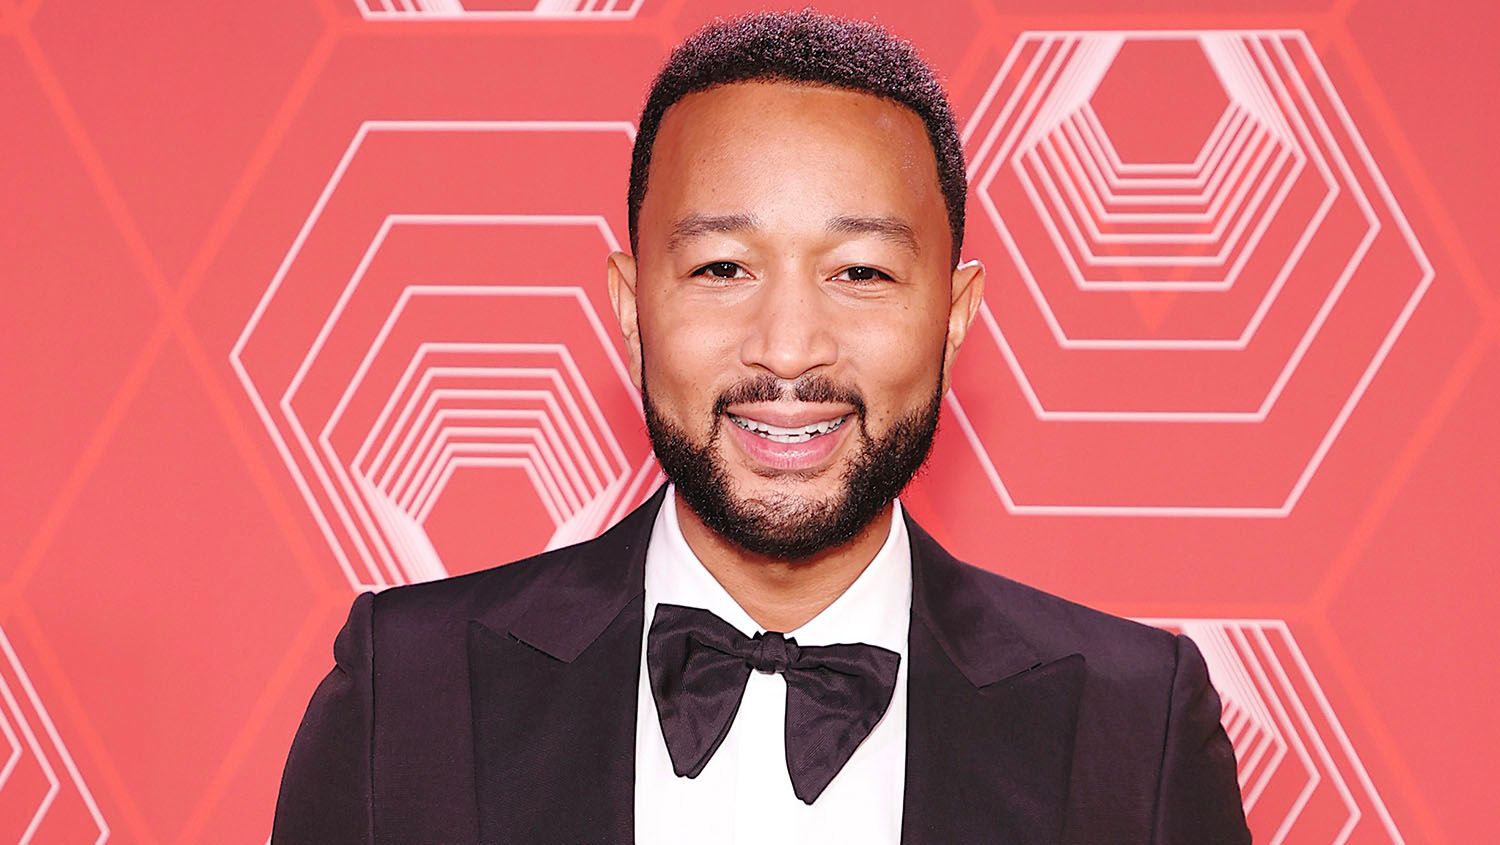 Photo shows John Legend in a tuxedo against a salmon pink background